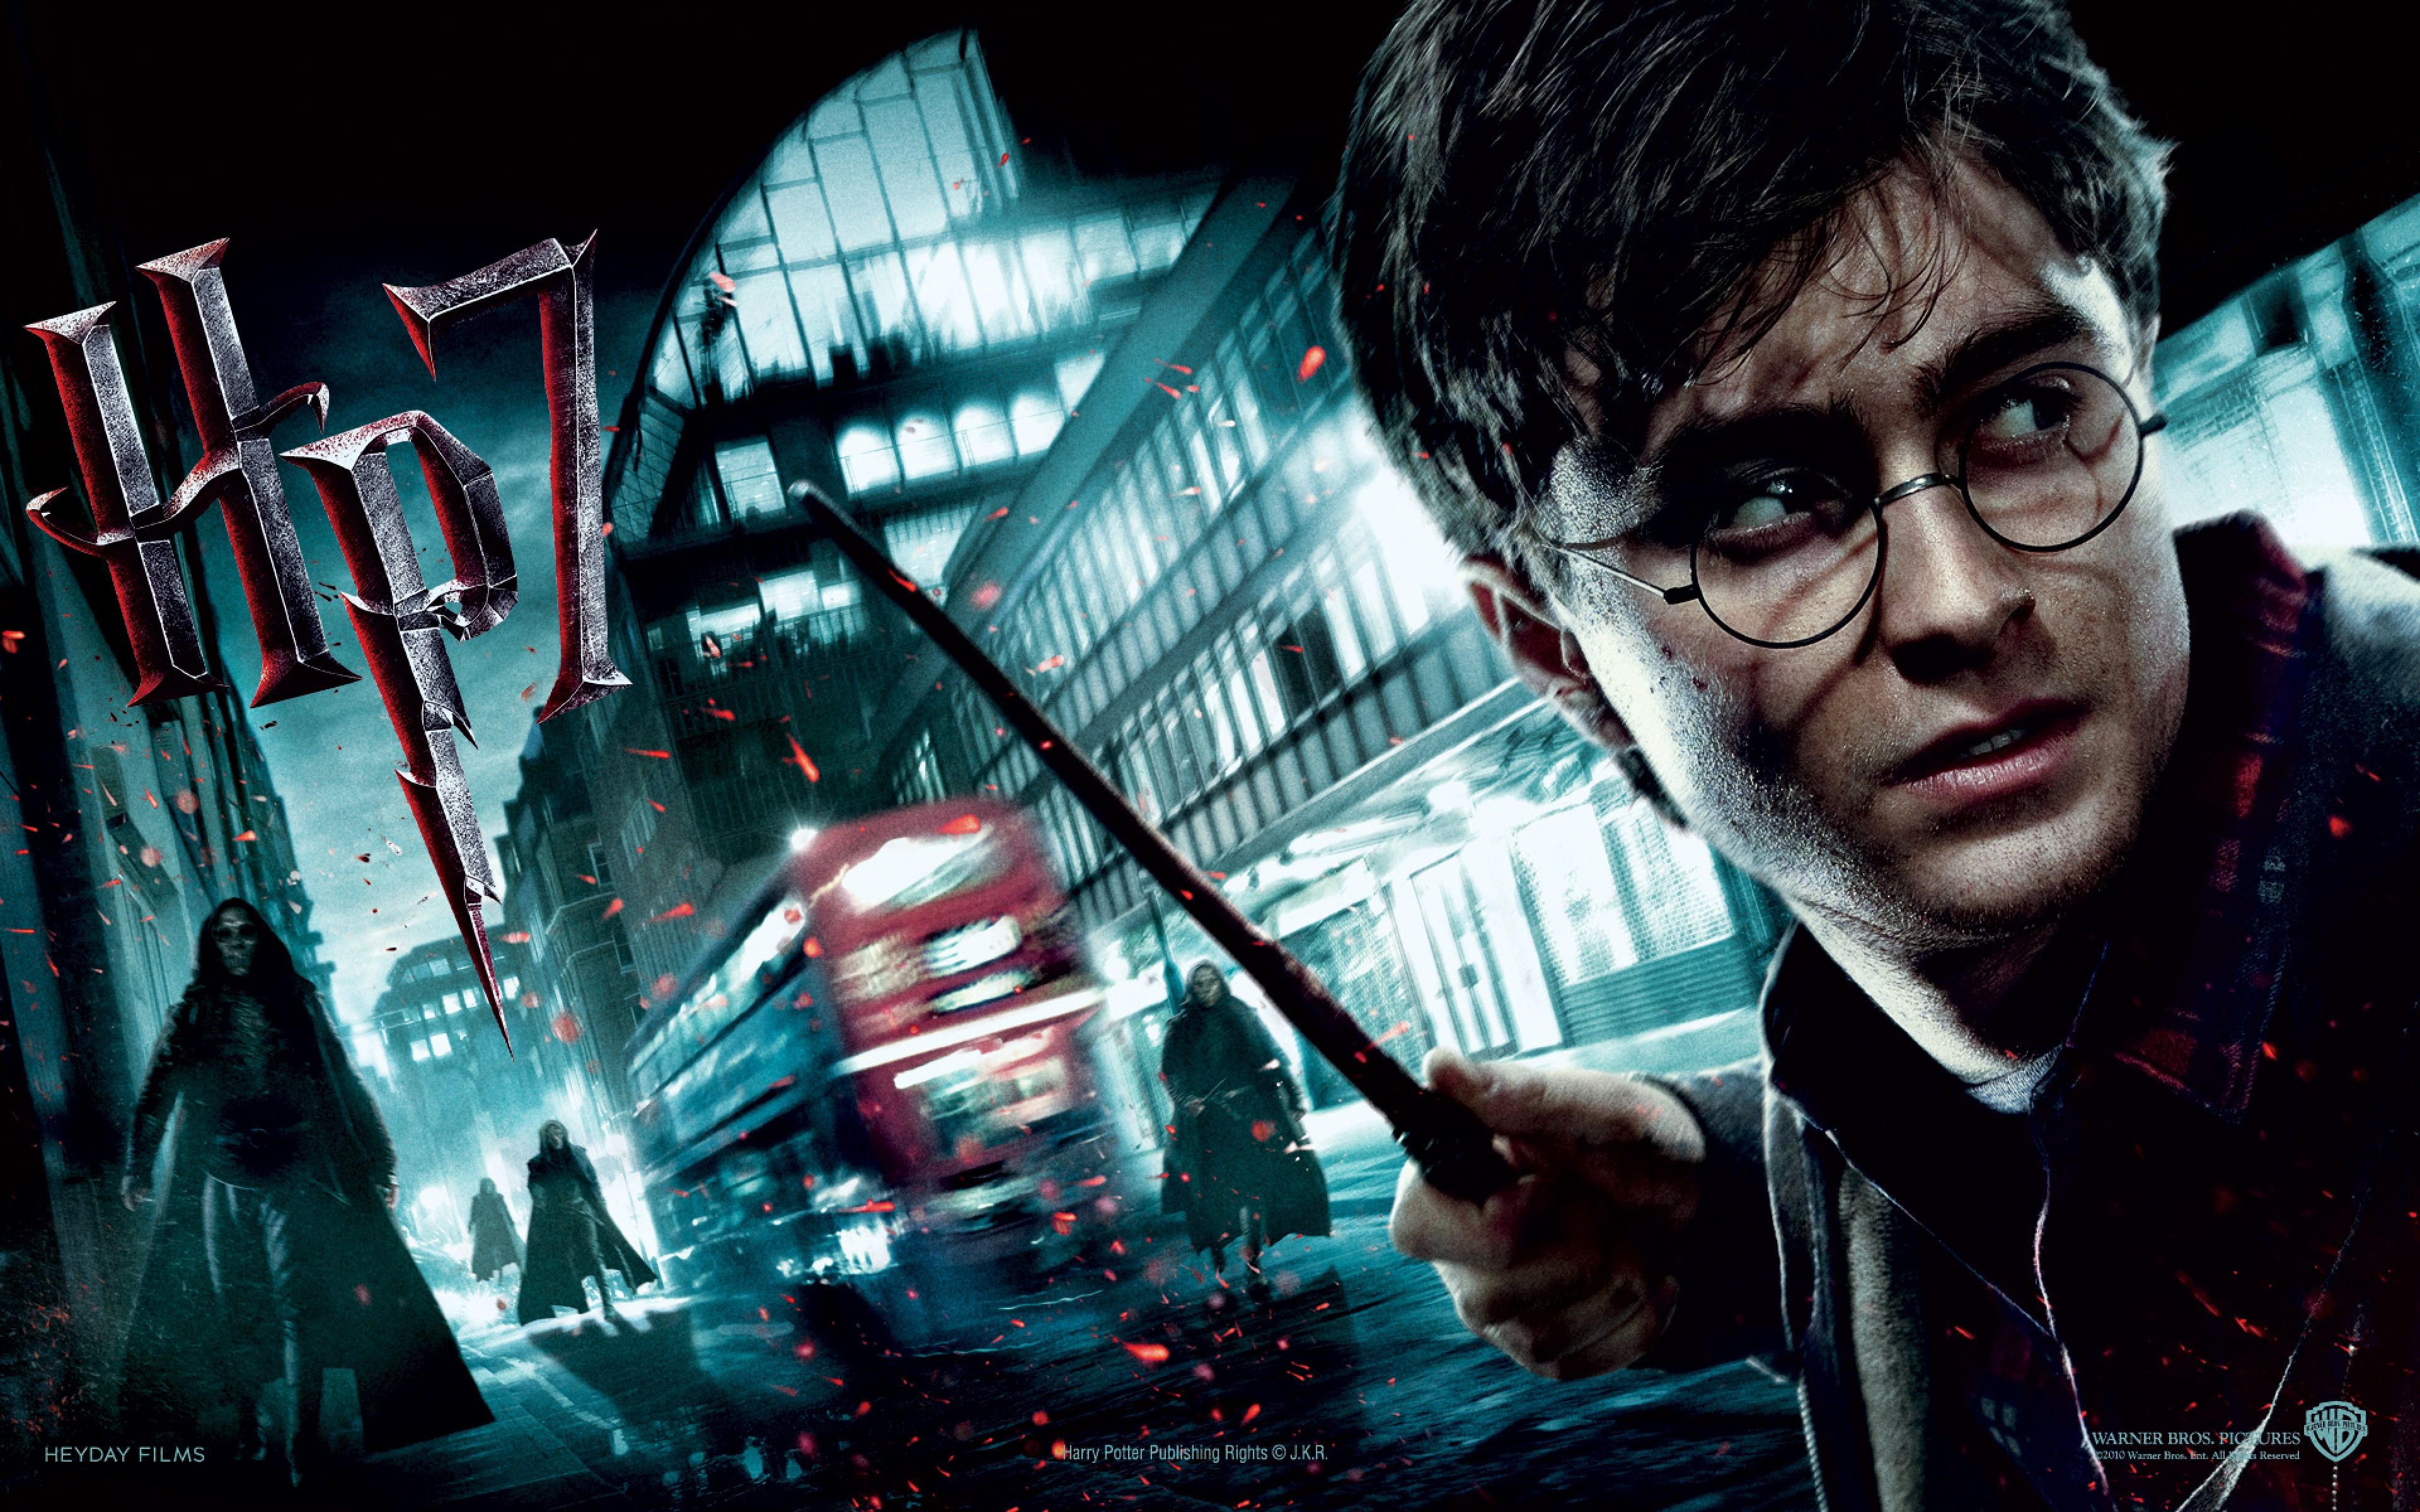 Download Wallpaper 3840x2400 Harry potter and the deathly hallows ...